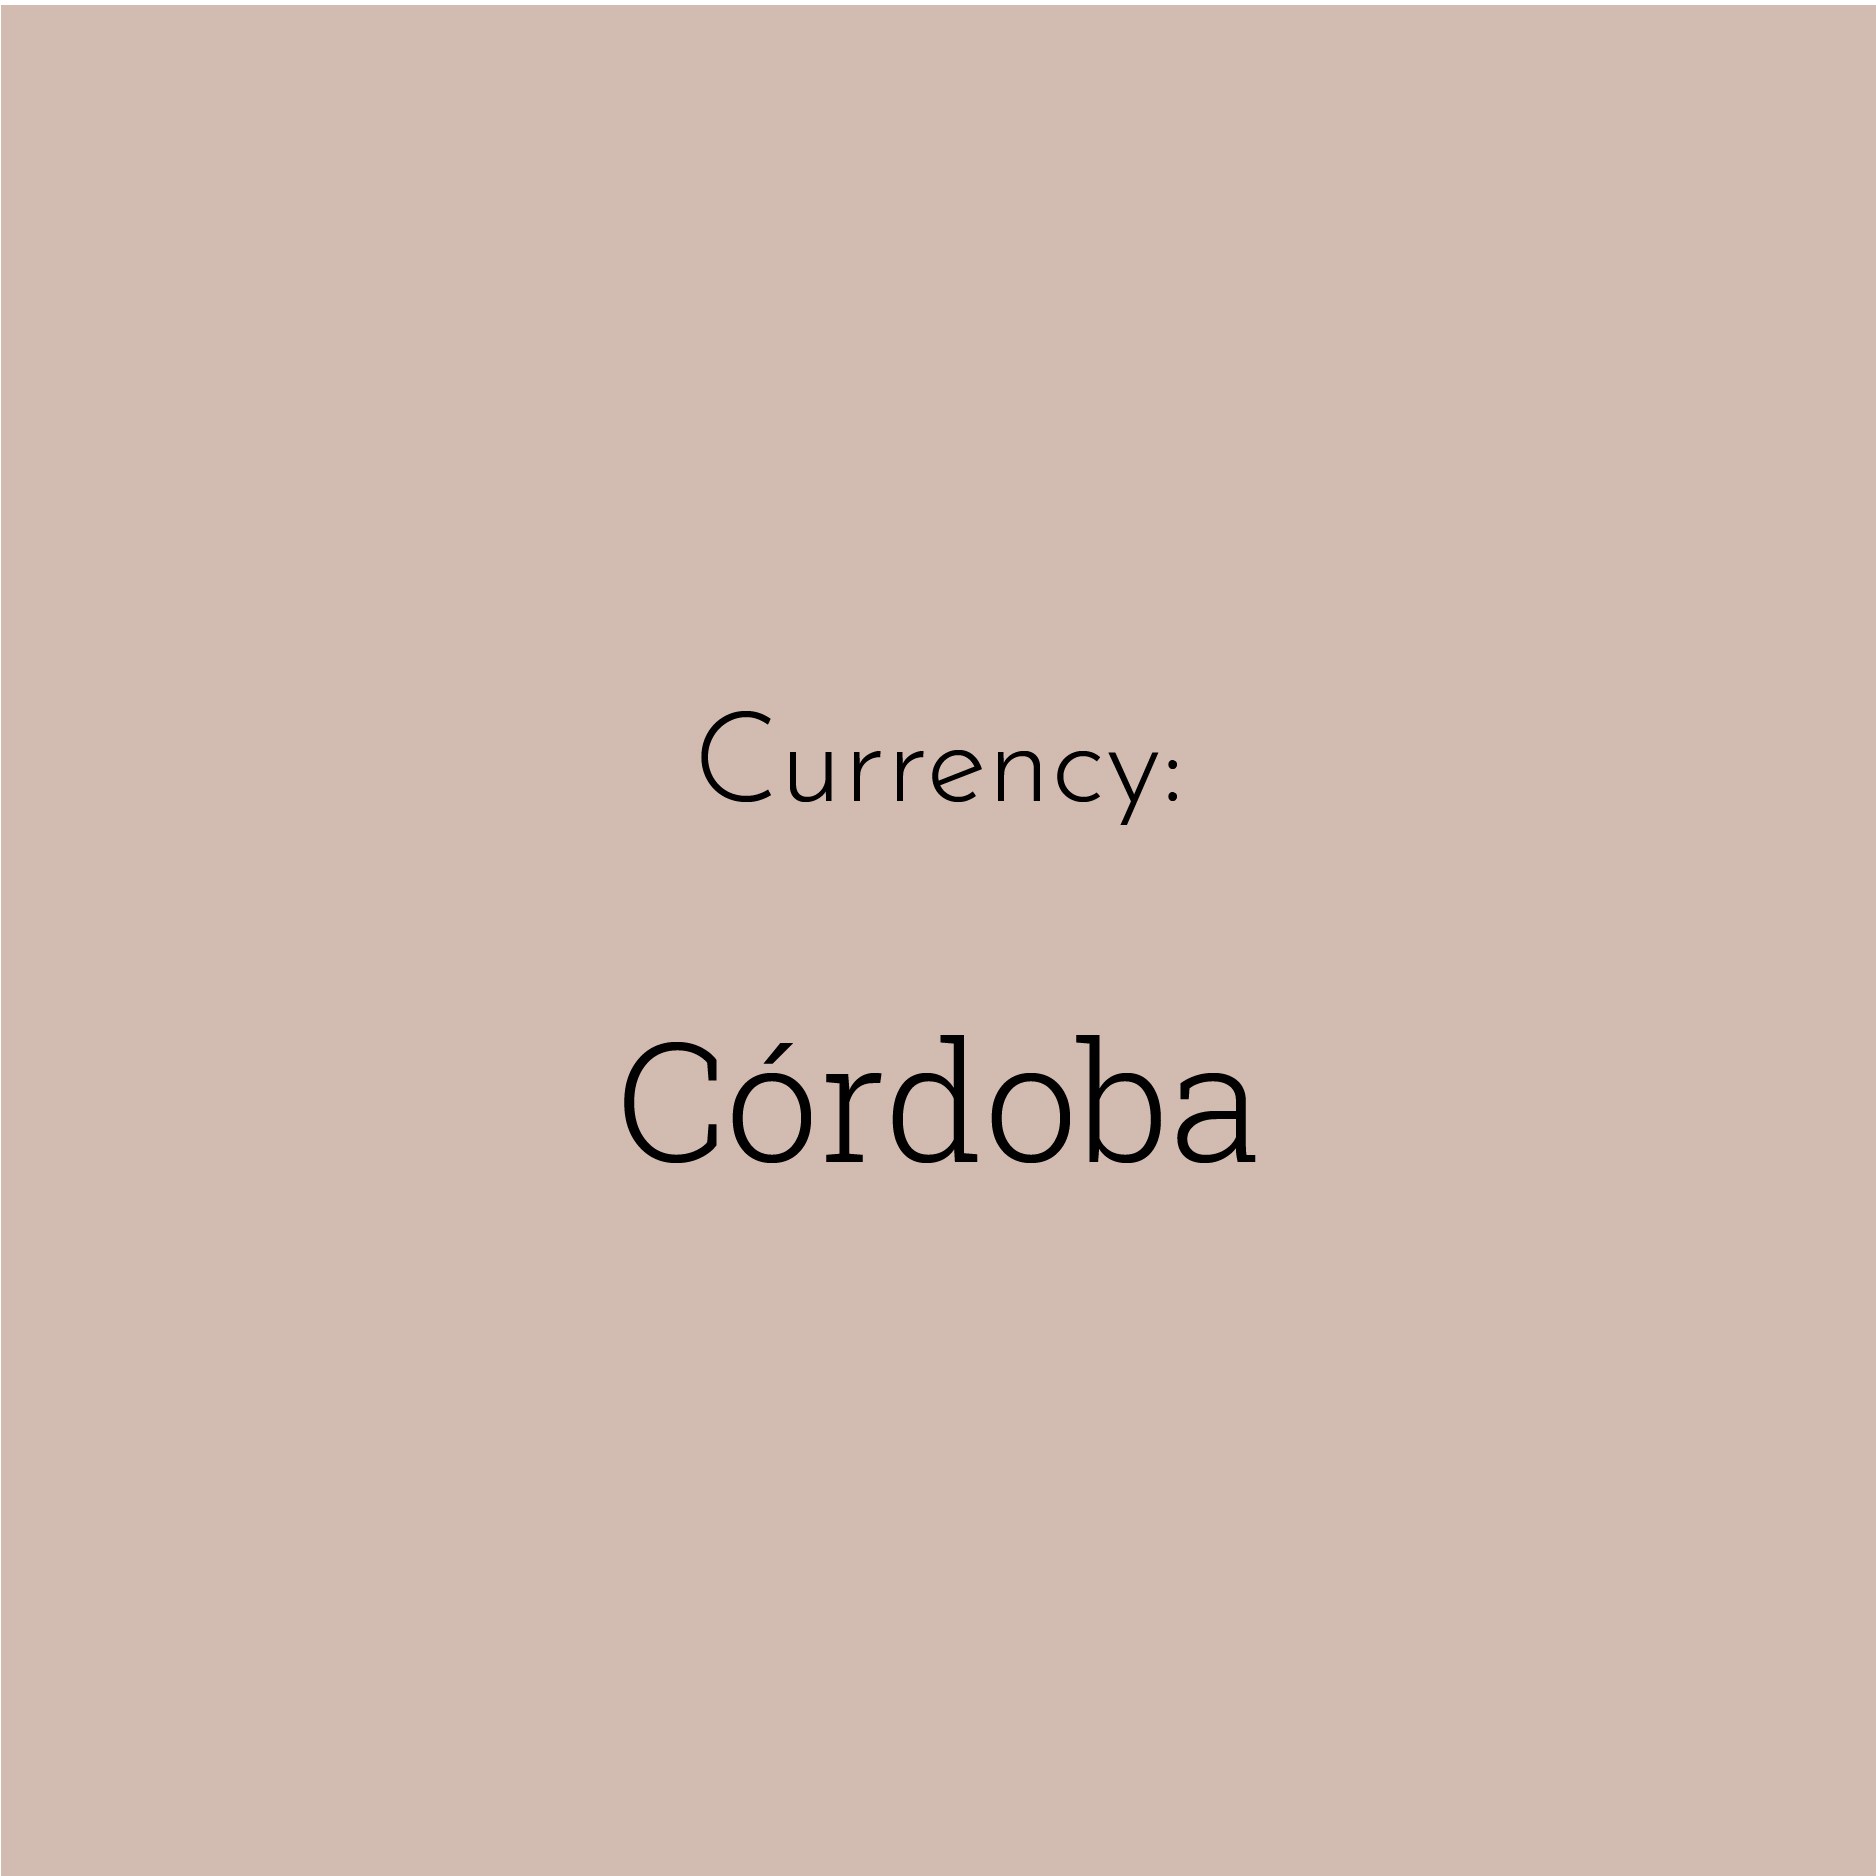 A solid brown block contains the text “Currency: Córdoba”